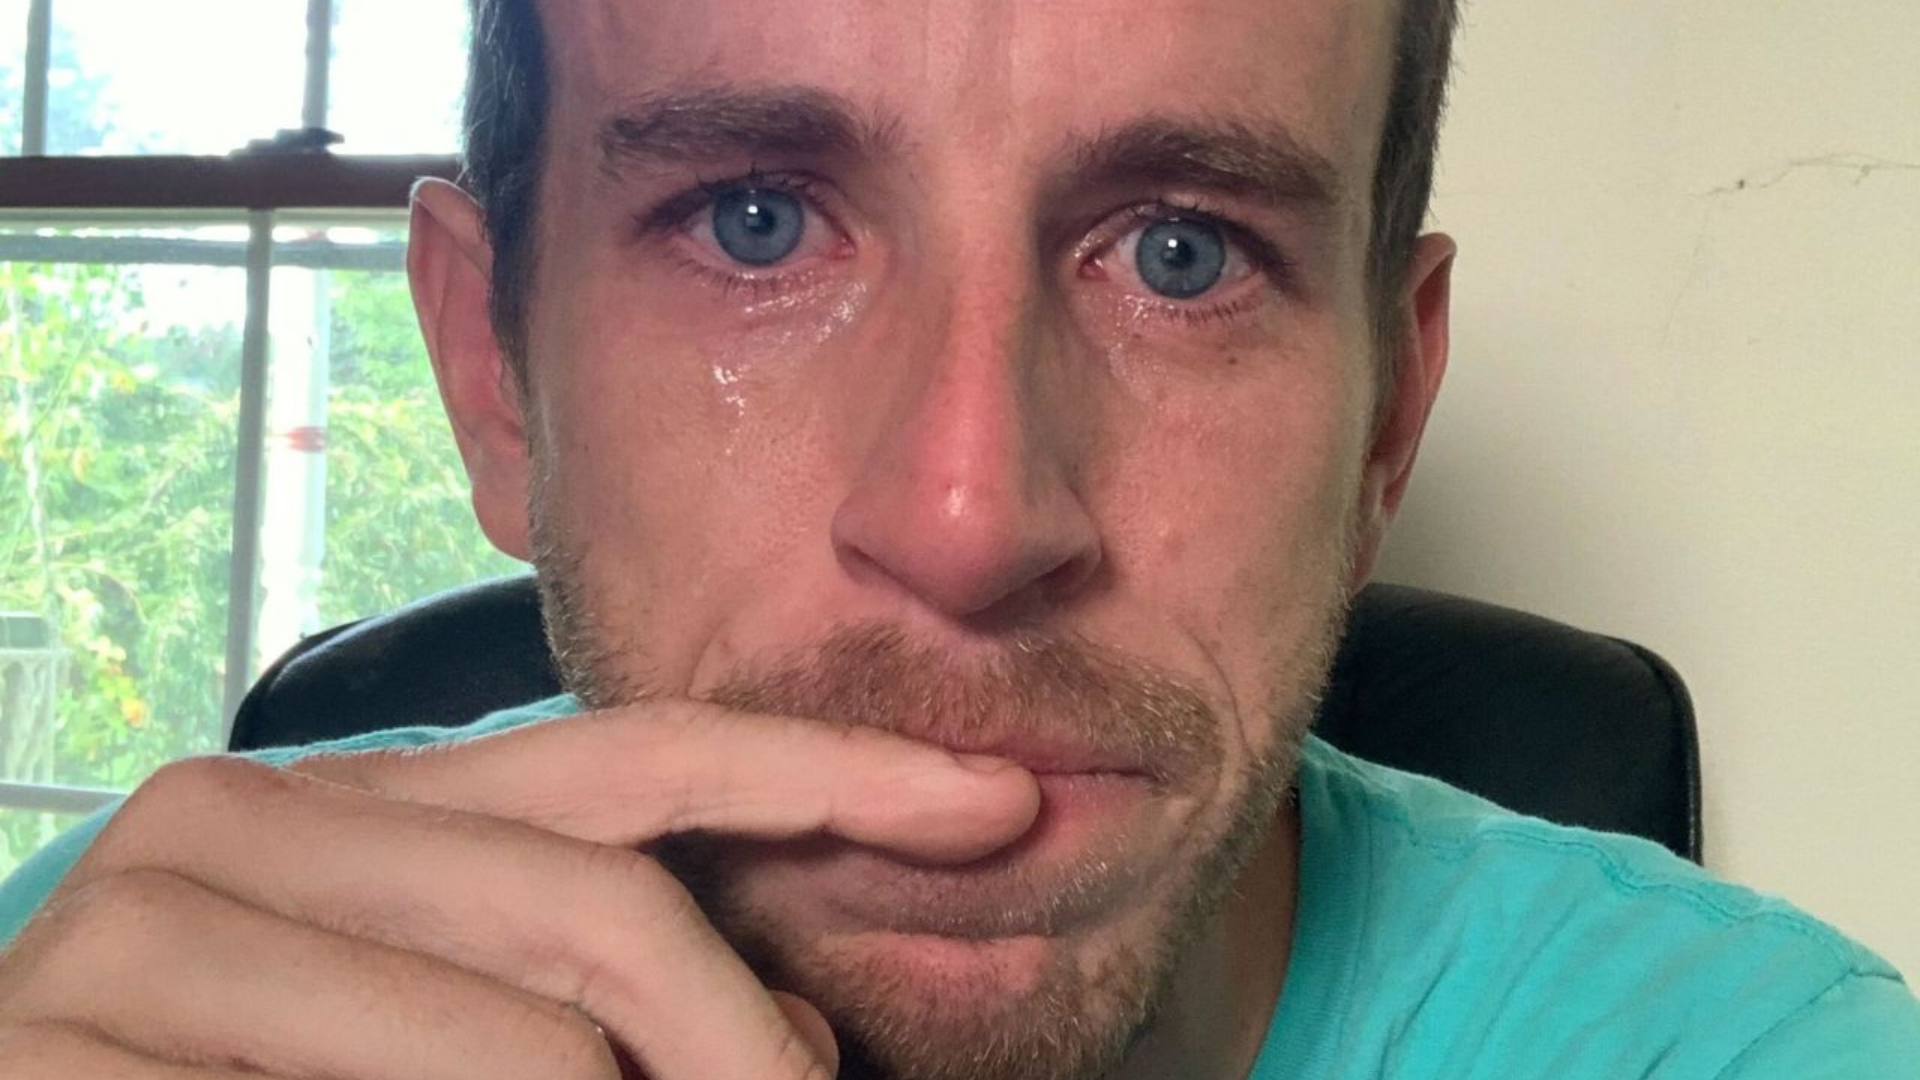 A teary-eyed seflie of Wallake in a bright blue shirt. He has blue eyes and is holding his pointer finger to his lips, which are pursed with emotion.